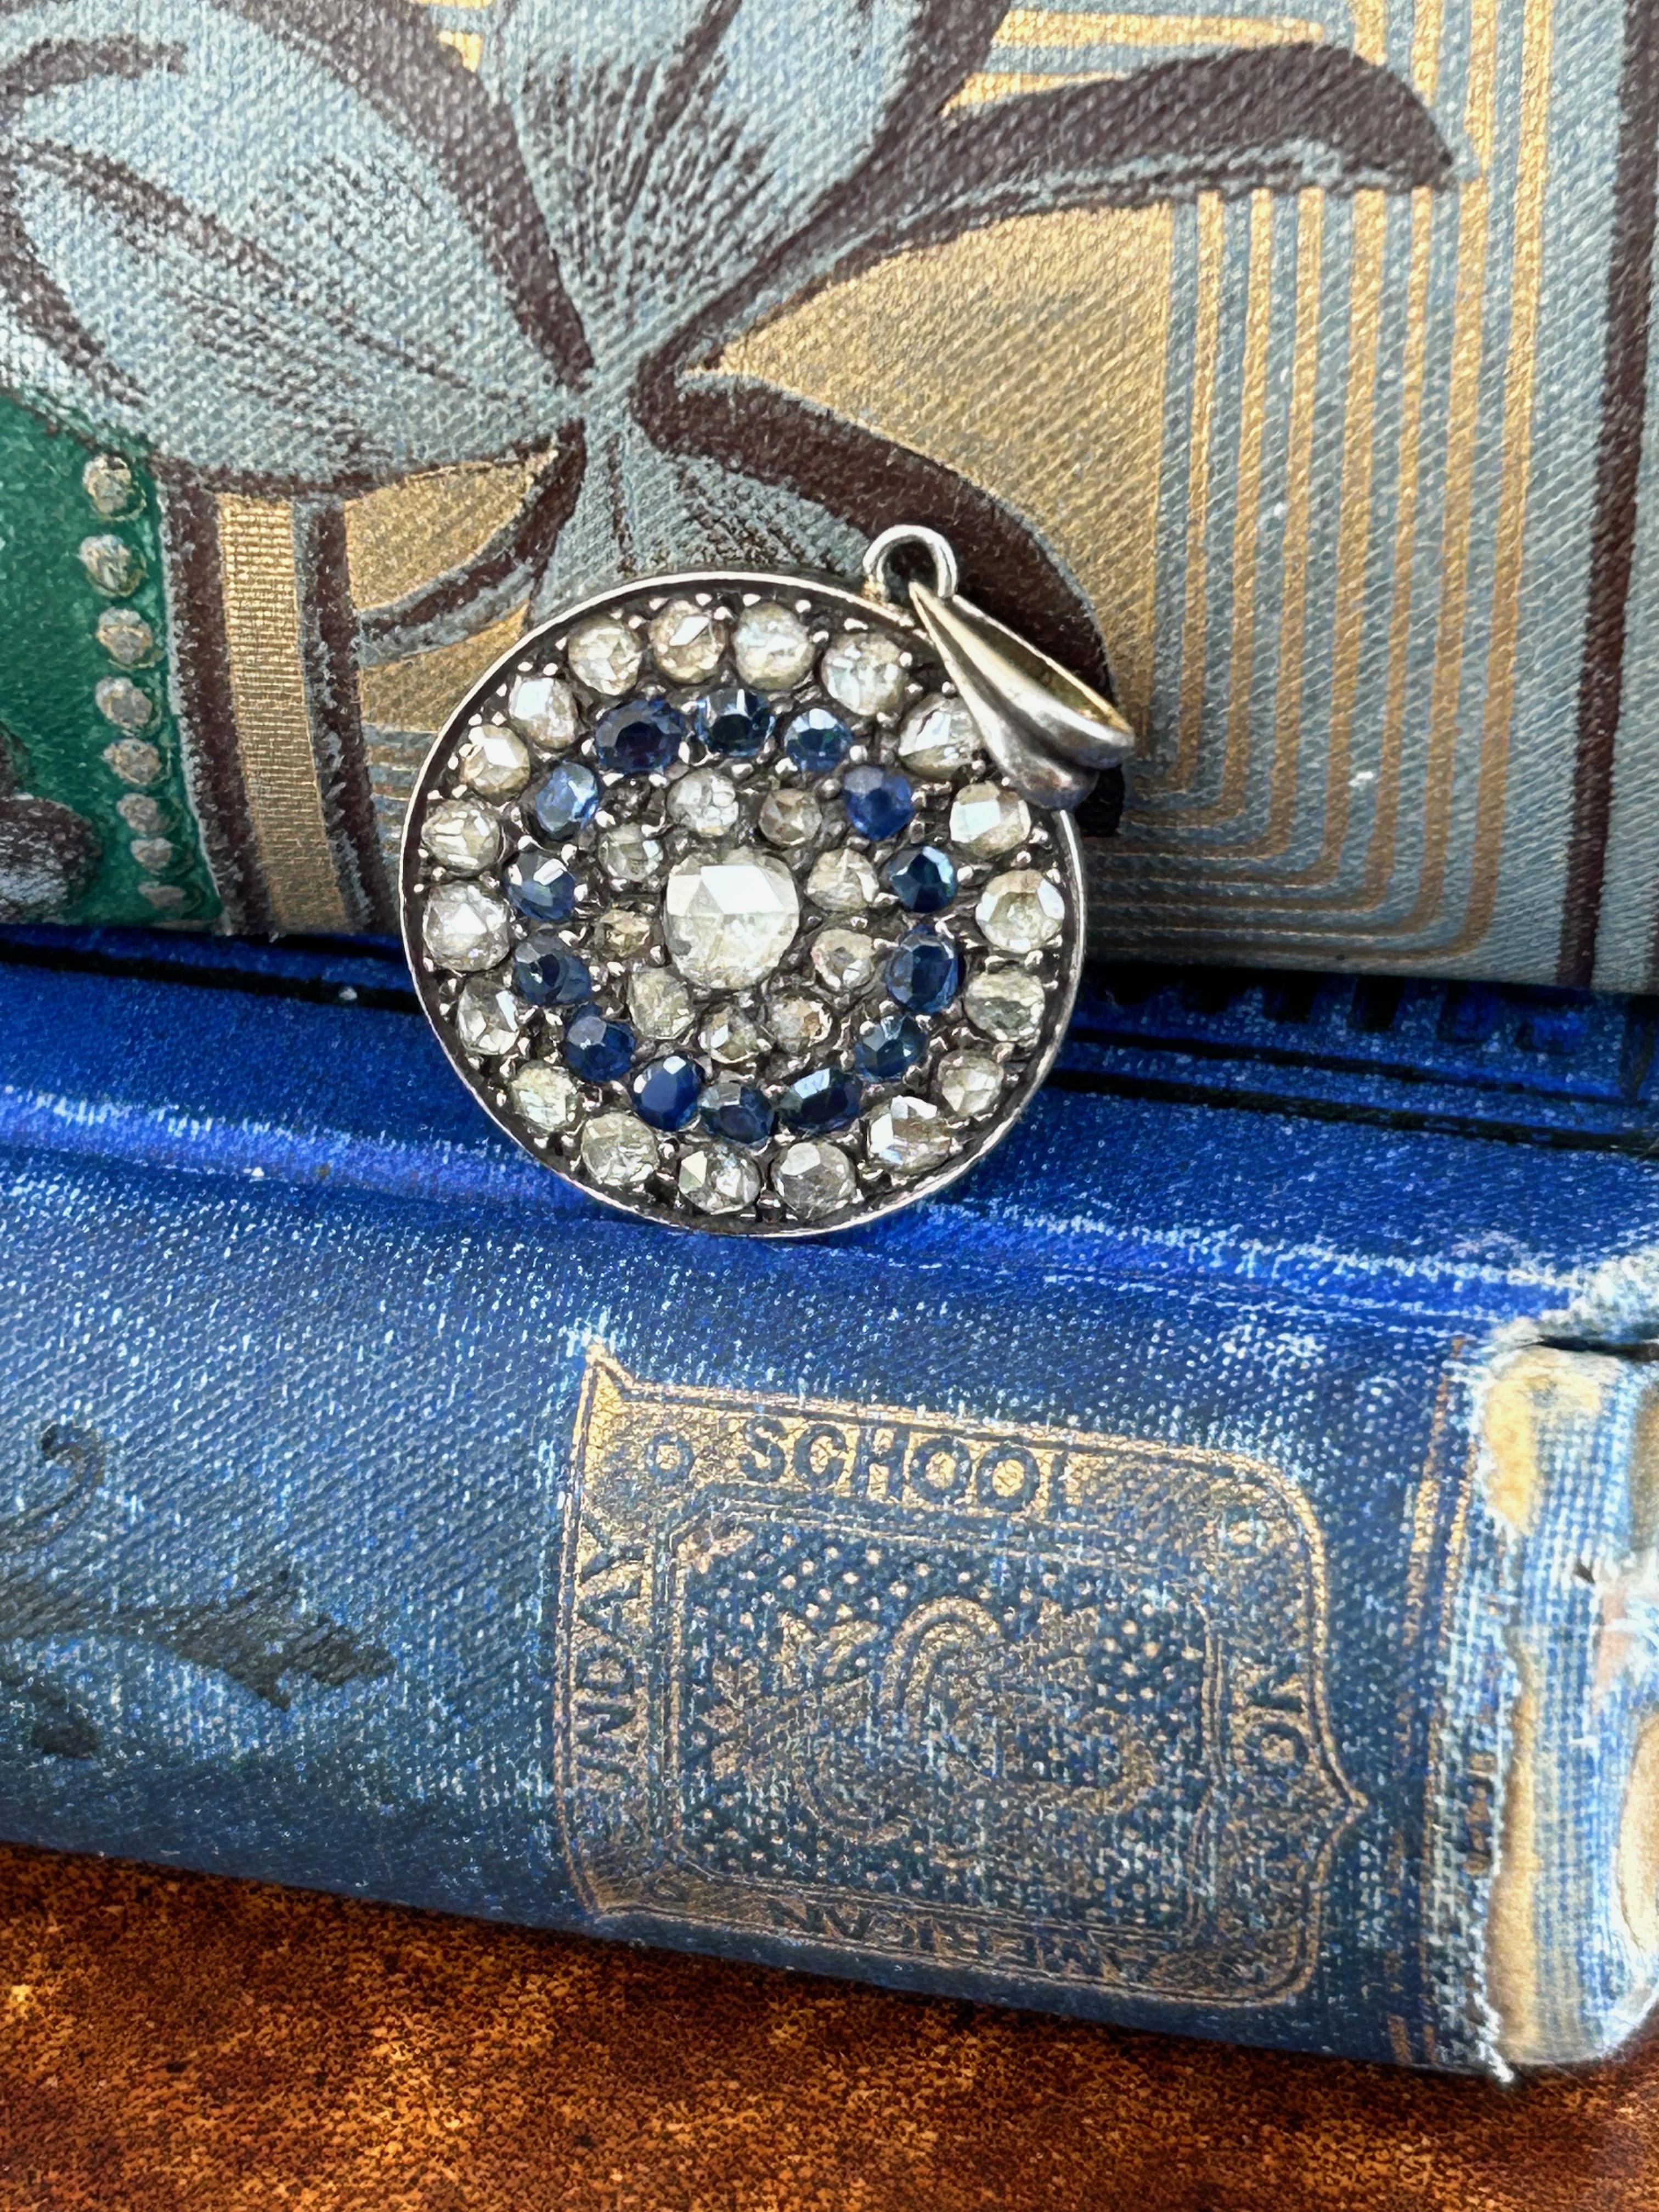 Description:
Antique Victorian Diamond and Sapphire Round Pendant, a stunning cluster design that seamlessly blends a lovely patina with old-world charm with timeless beauty.

Features:
Center Stone: A 4mm old Rose Cut Diamond, weighing .15 carats,